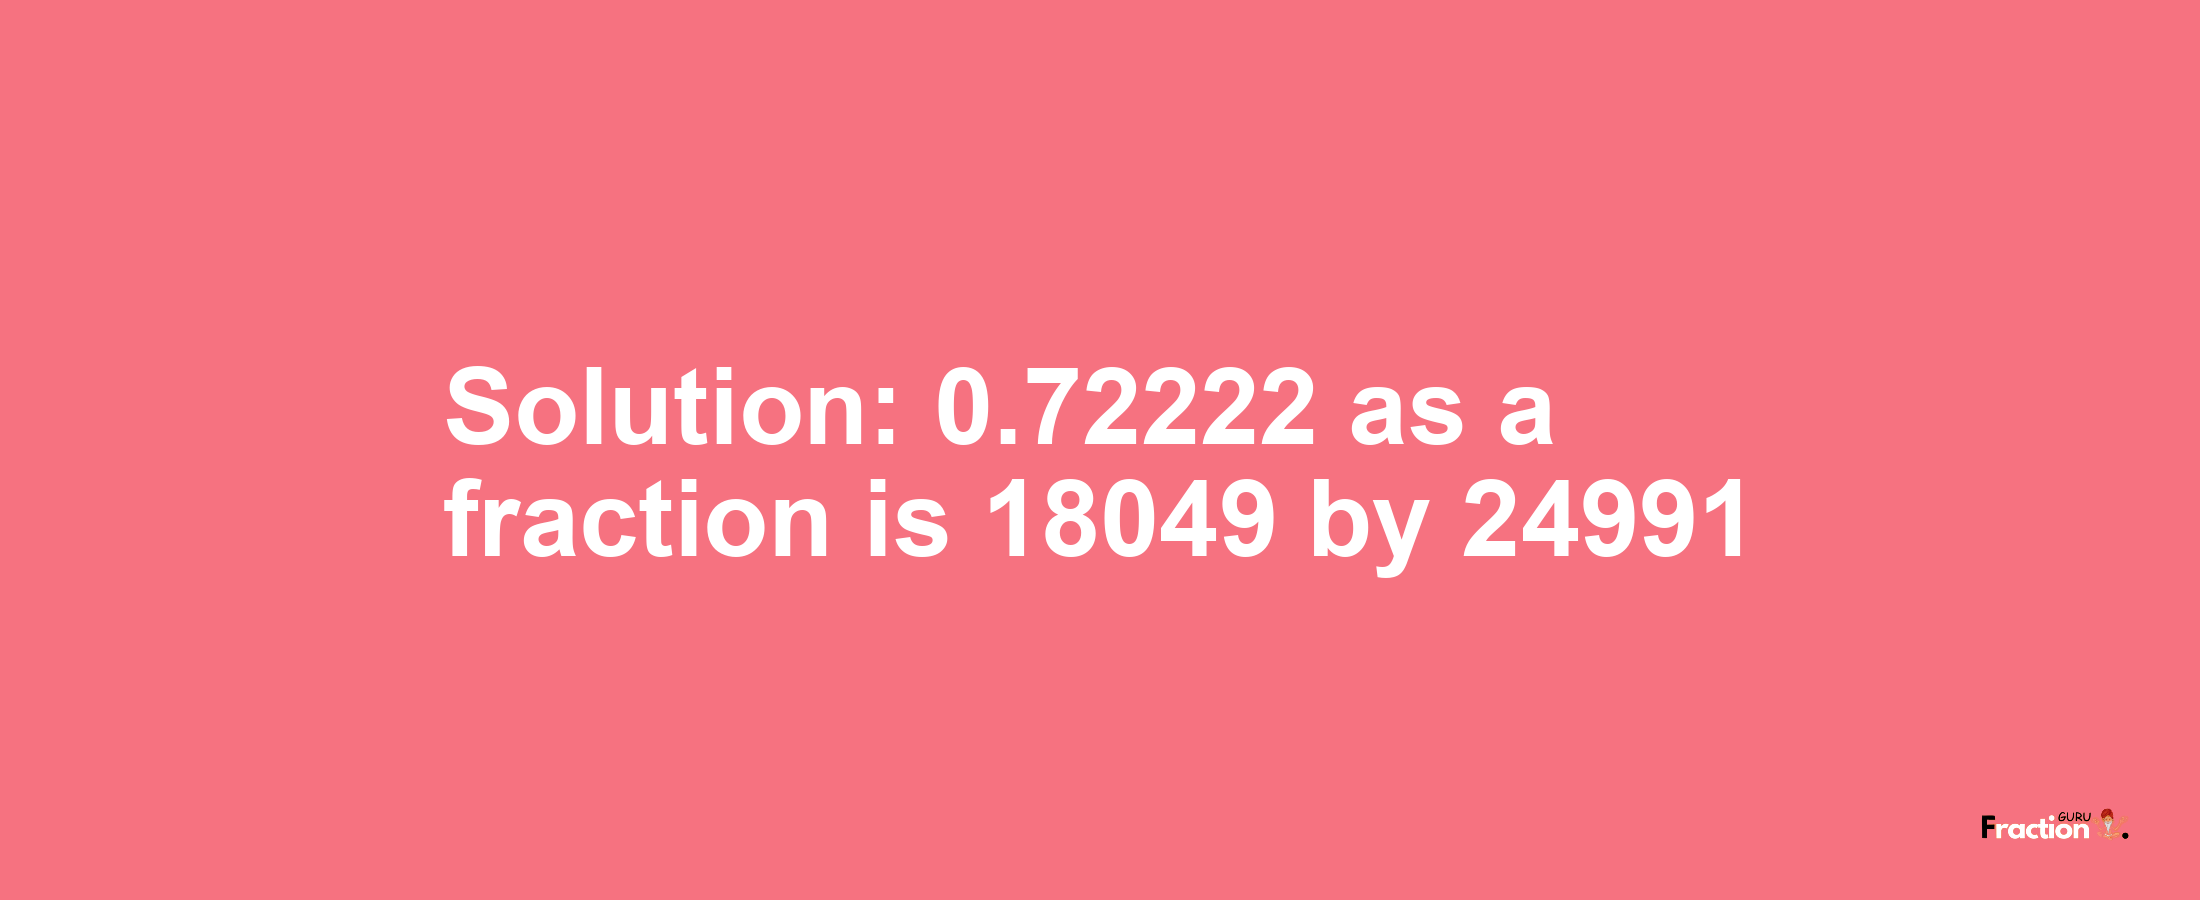 Solution:0.72222 as a fraction is 18049/24991